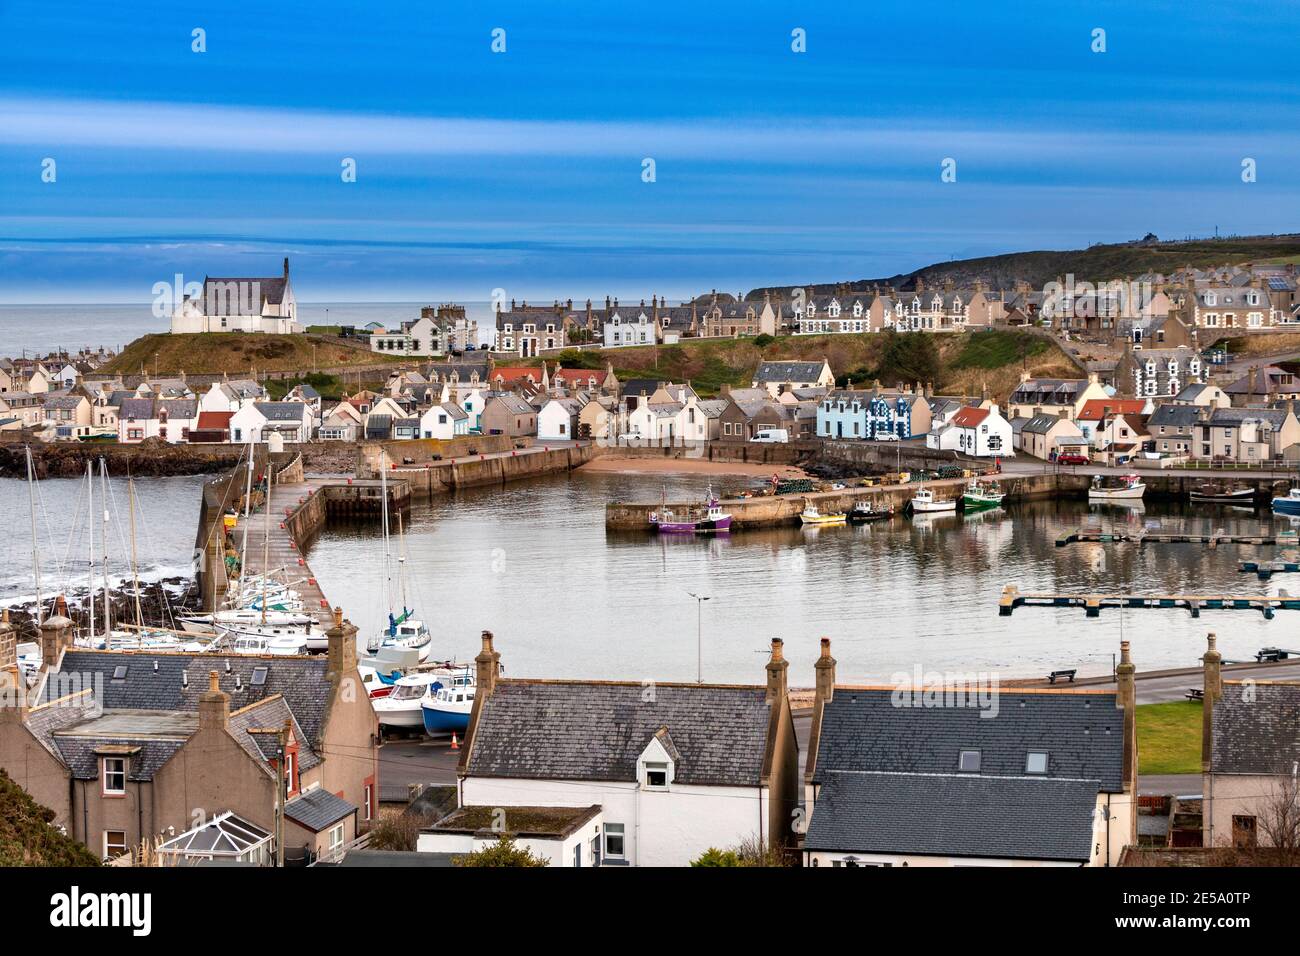 FINDOCHTY MORAY COAST SCOTLAND THE HARBOUR AND VILLAGE HOUSES Stock Photo